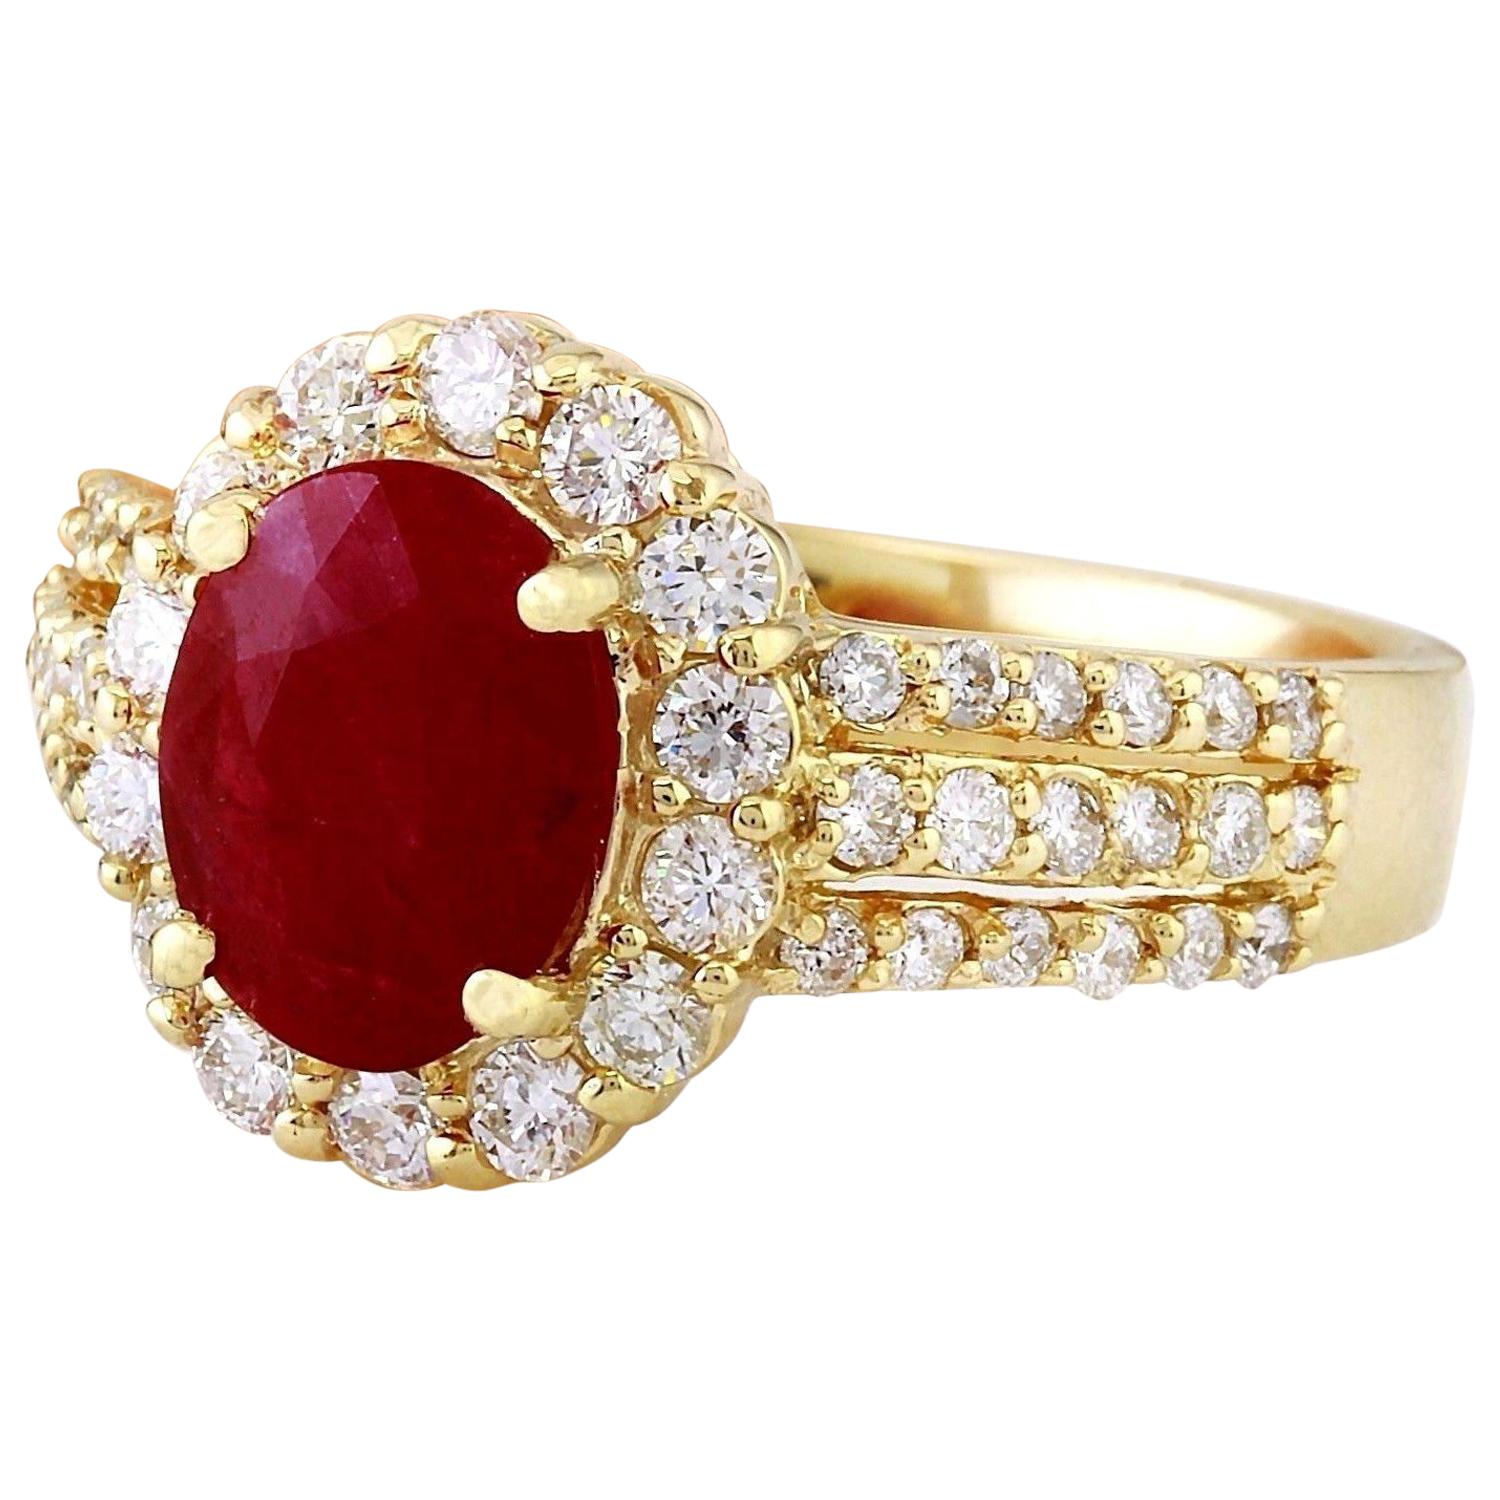 3.73 Carat Natural Ruby 14K Solid Yellow Gold Diamond Ring
 Item Type: Ring
 Item Style: Engagement
 Material: 14K Yellow Gold
 Mainstone: Ruby
 Stone Color: Red
 Stone Weight: 2.67 Carat
 Stone Shape: Oval
 Stone Quantity: 1
 Stone Dimensions: